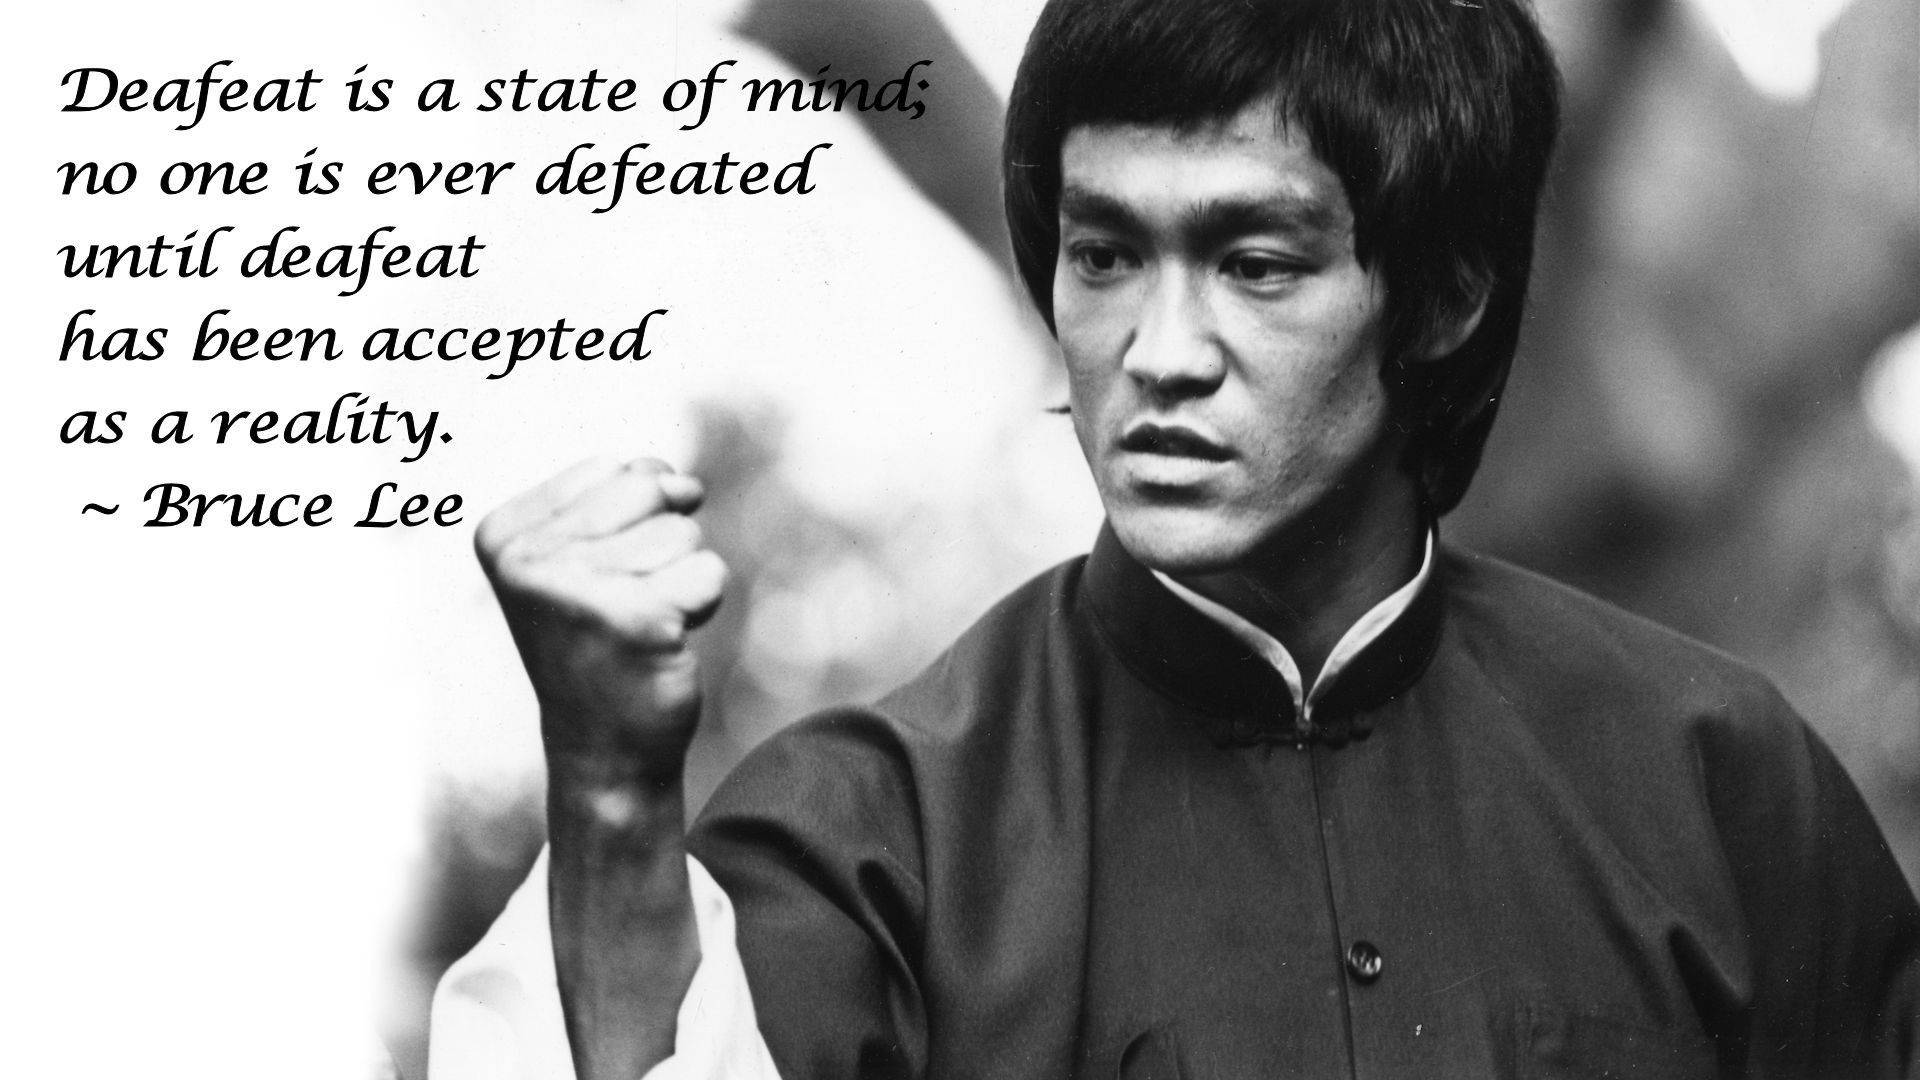 Bruce Lee Quote About Defeat Background